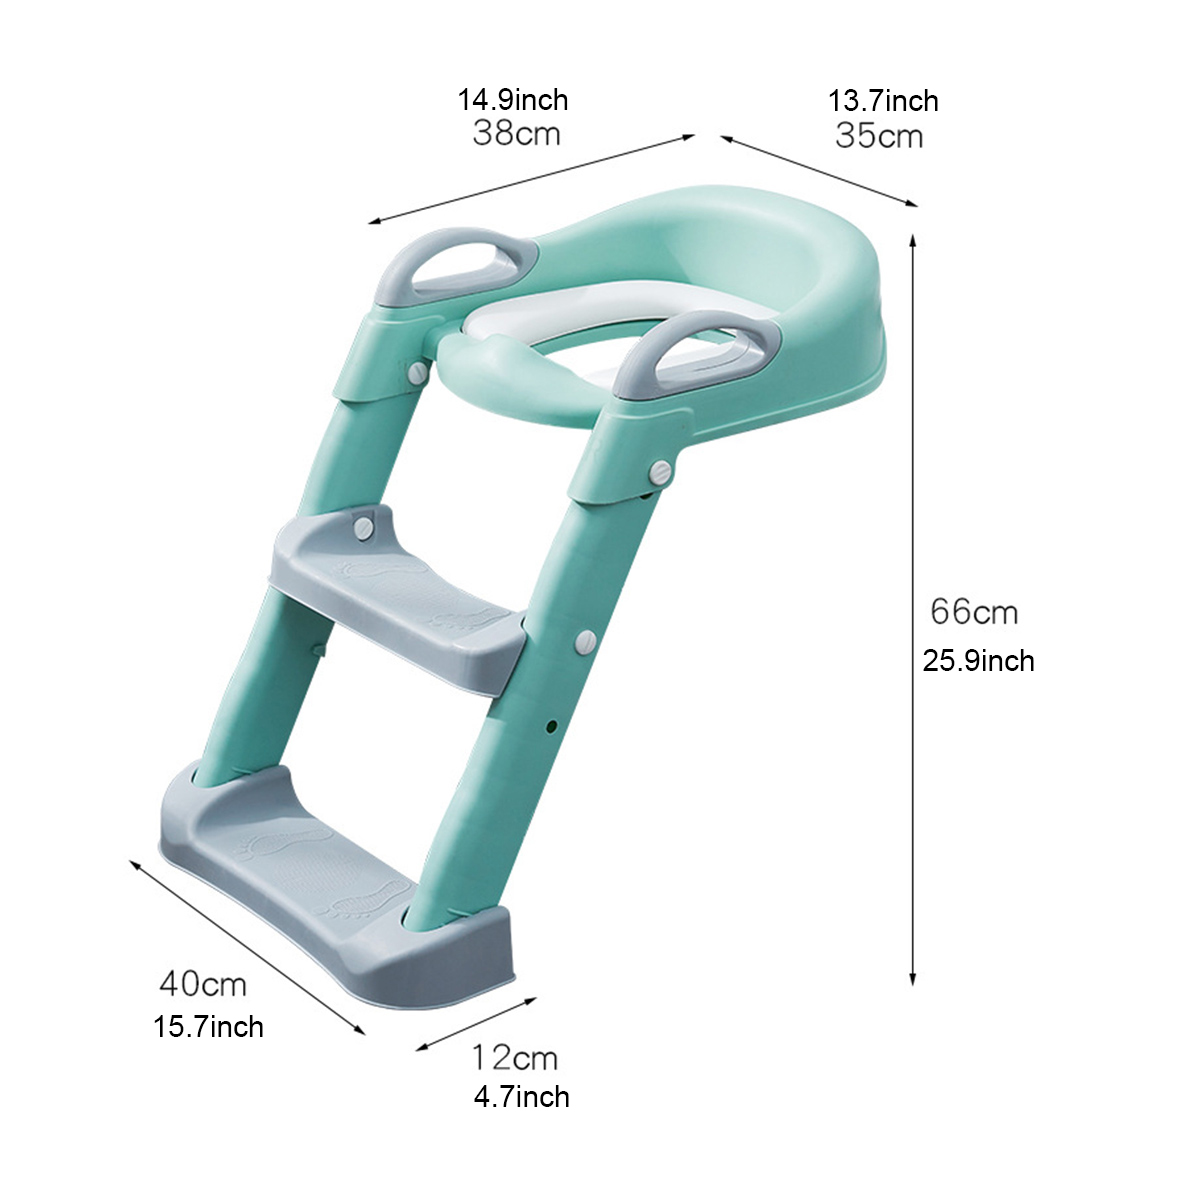 Non-Slip Kids Toilet Potty Summer Potty Chair Soft Padded Seat Step Up Training Stool Chair Toddler Ladder Comfortable with Soft Cushion - image 3 of 7